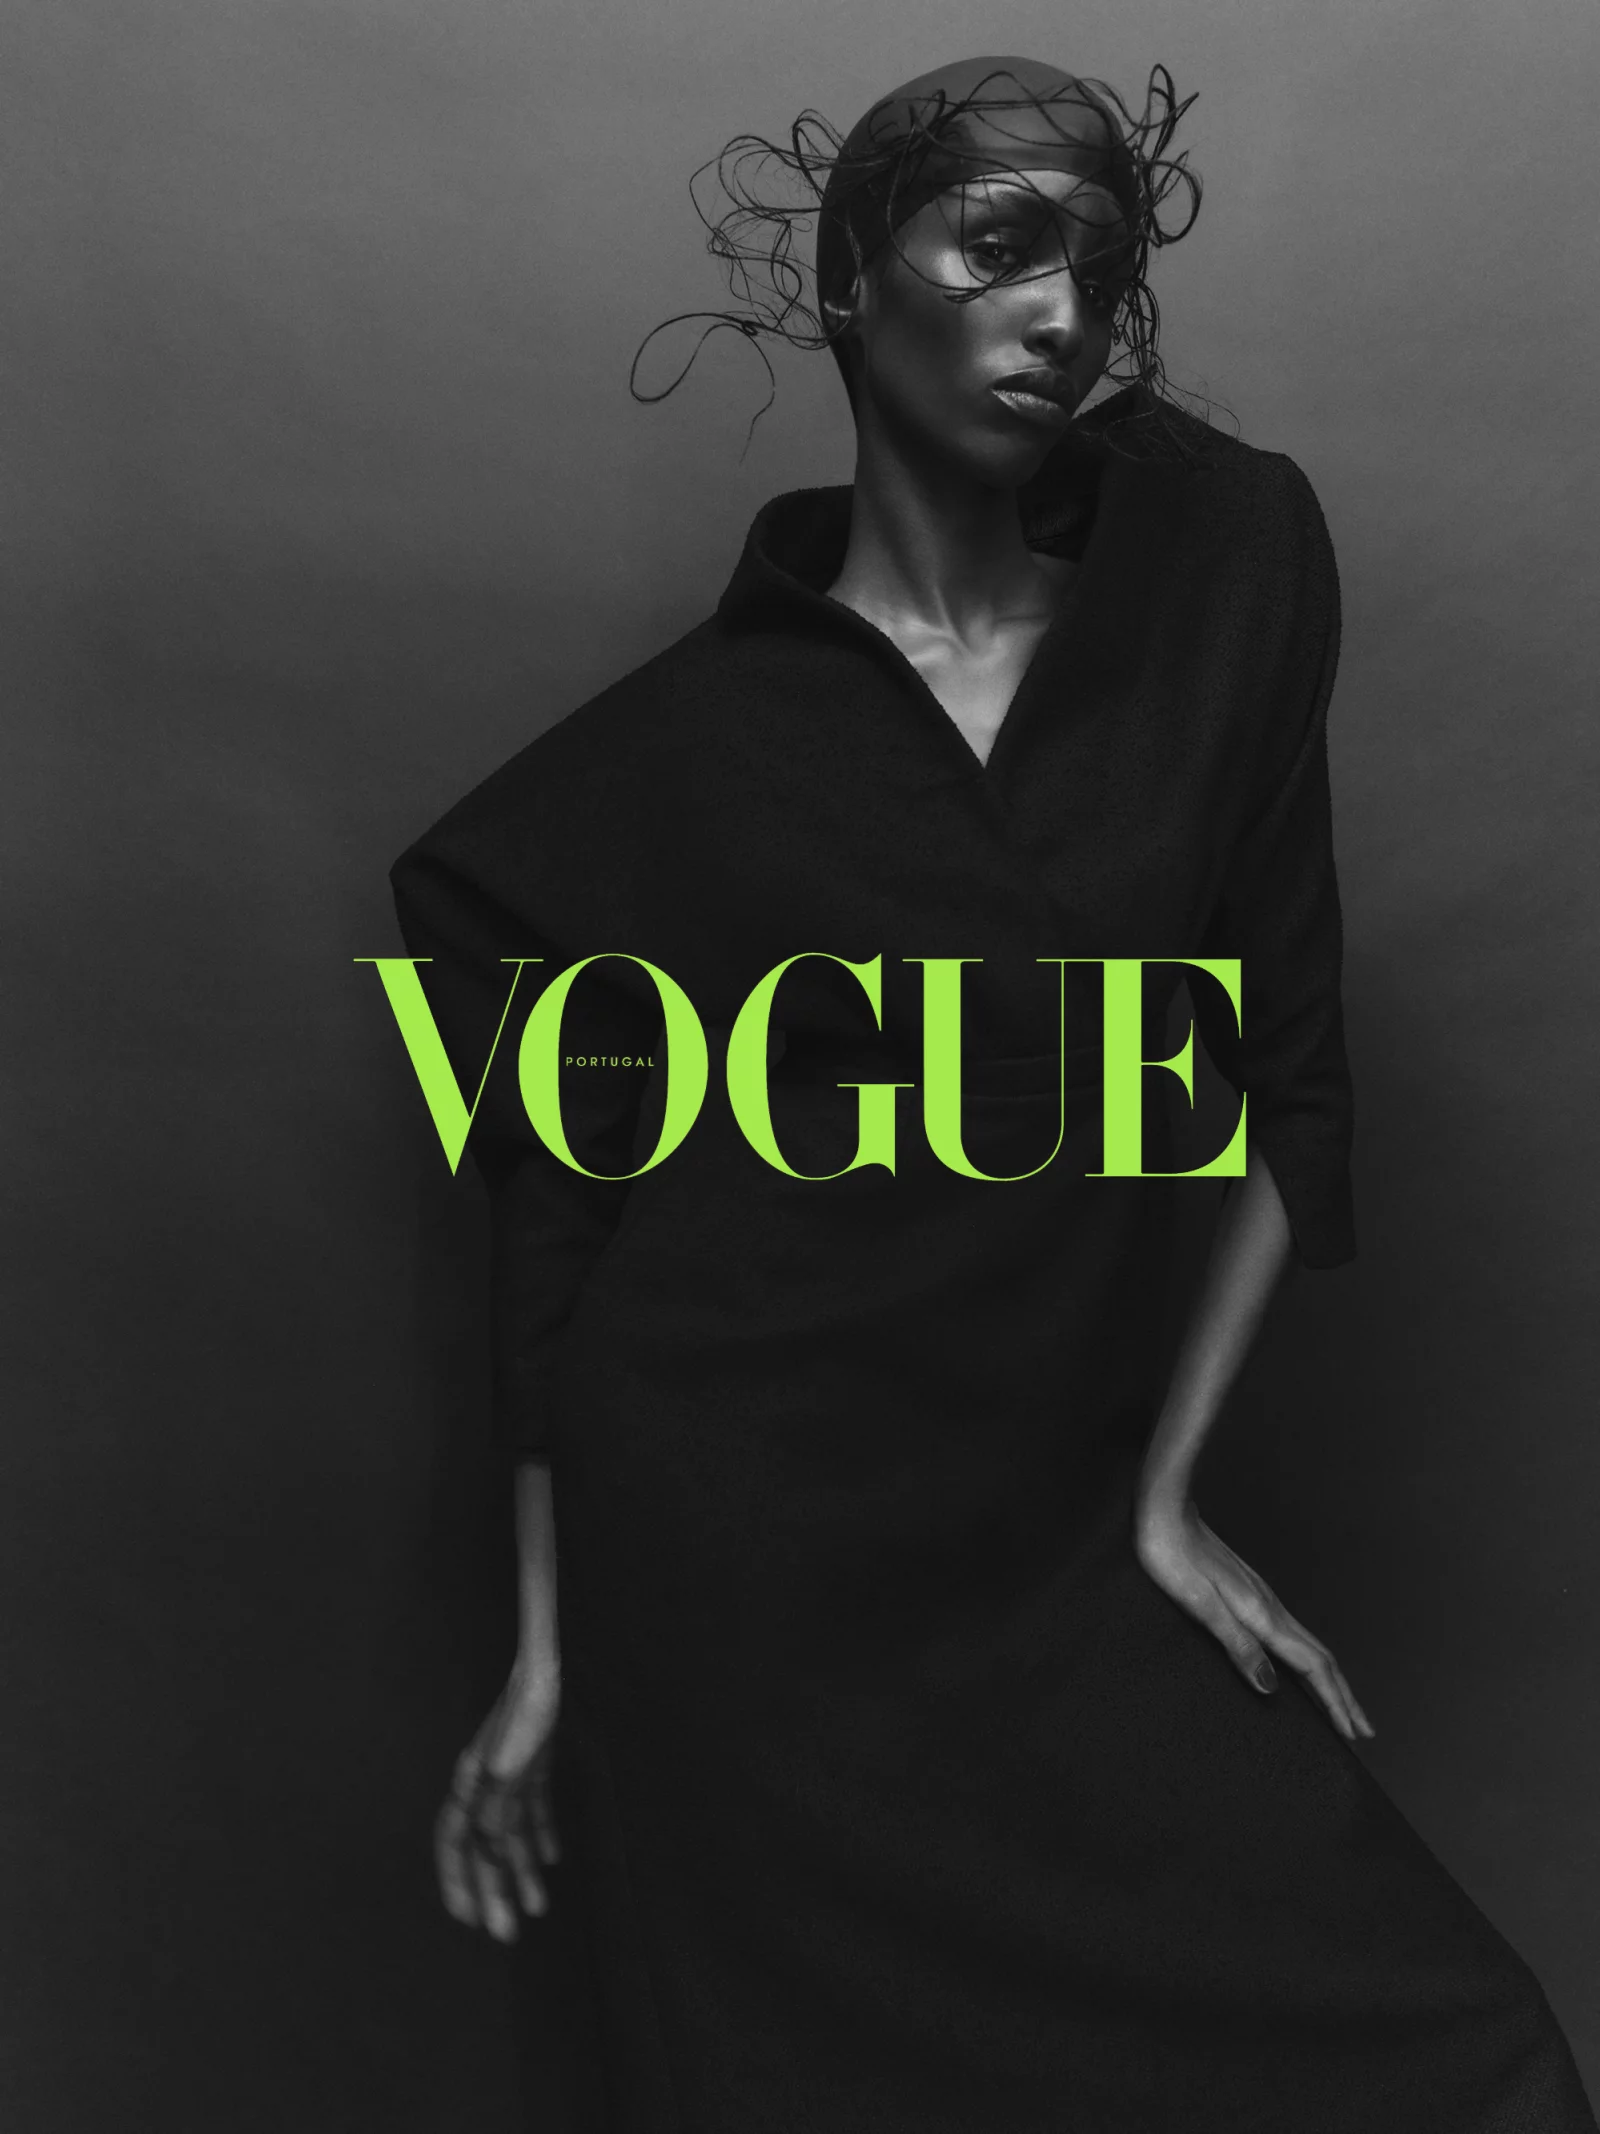 VOGUE Portugal 5 by Andreas ORTNER